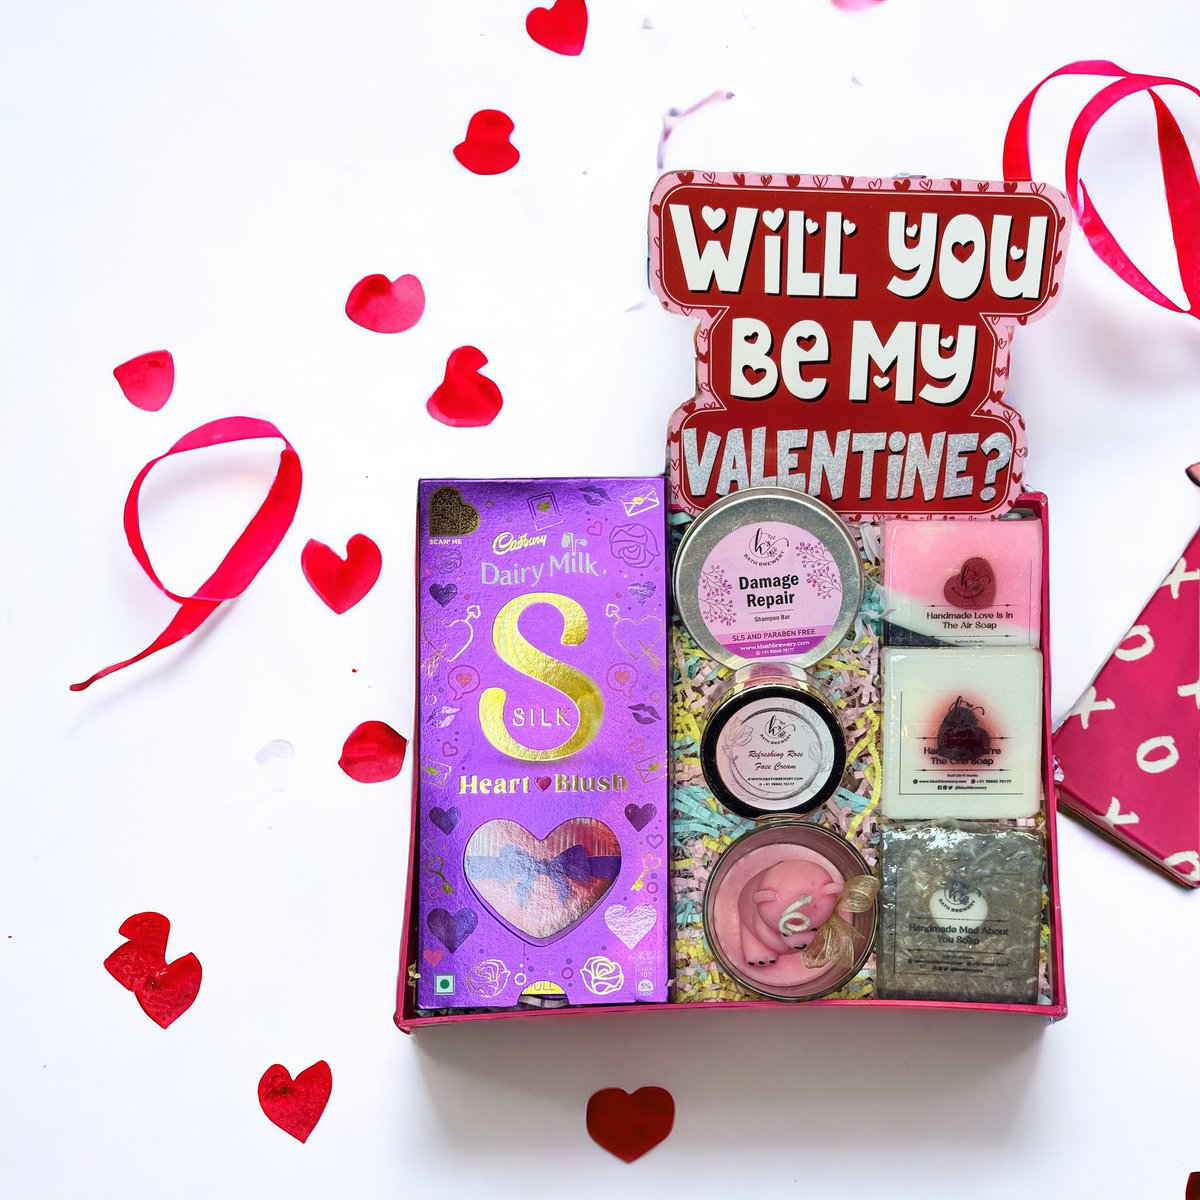 Get ready to fall in love with our 'XOXO' Hamper Box! Handcrafted soaps, a rejuvenating shampoo bar, and rose face cream to pamper your Valentine 🌹 Add a teddy candle and Cadbury Silk for sweetness. 🍫 Free shipping in India! 💌 #ValentinesDay #GiftIdeas #KBathBrewery